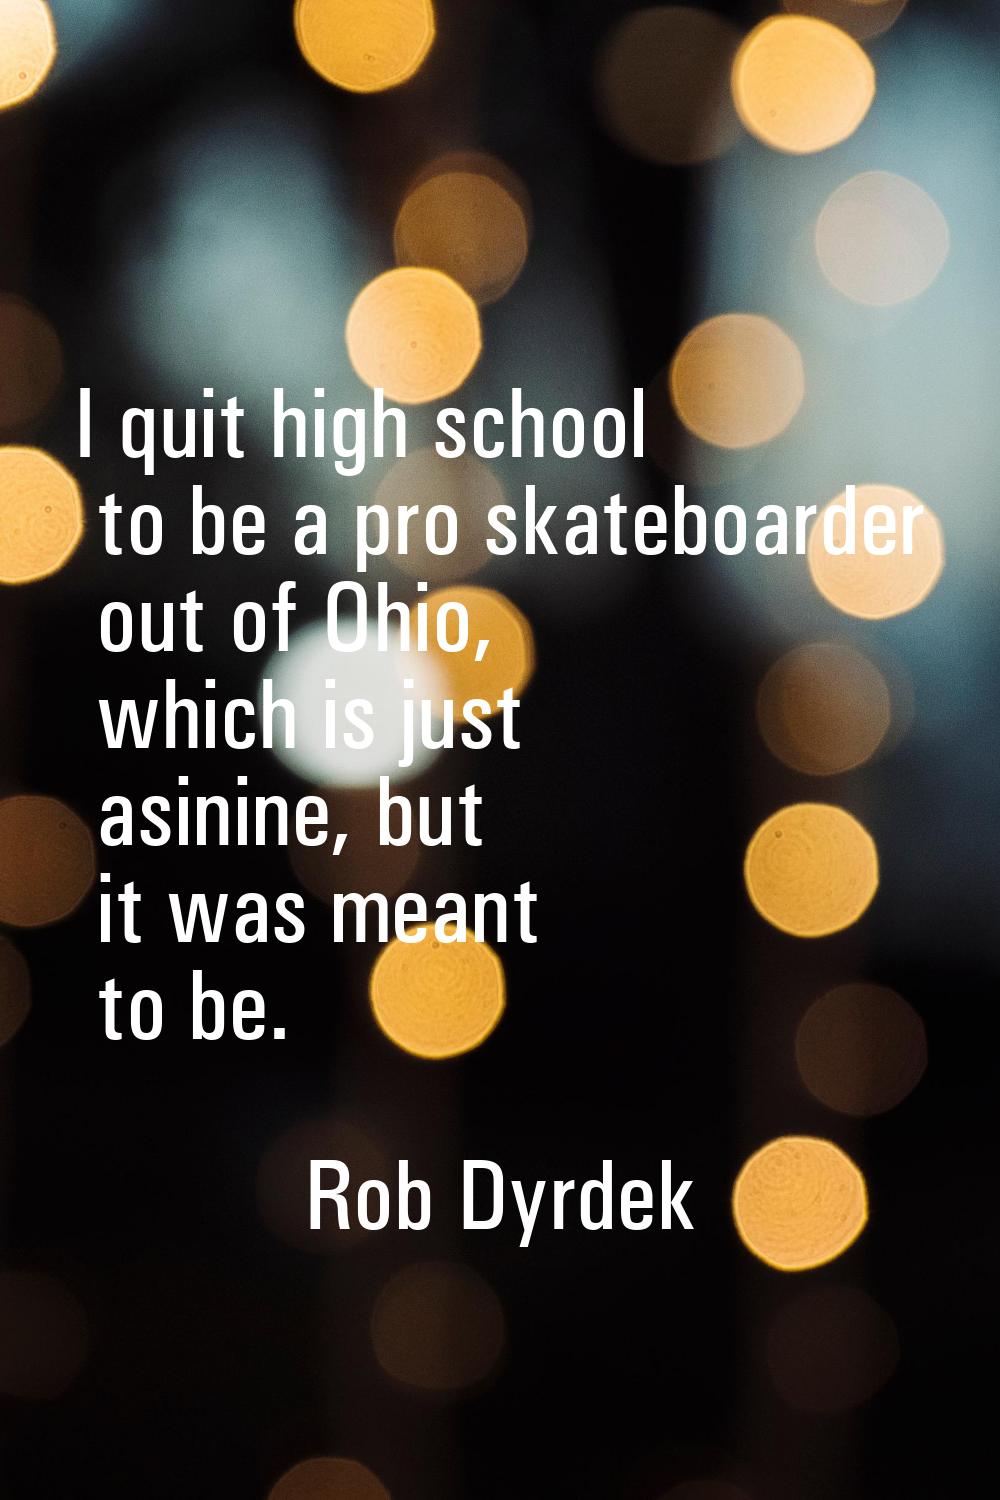 I quit high school to be a pro skateboarder out of Ohio, which is just asinine, but it was meant to